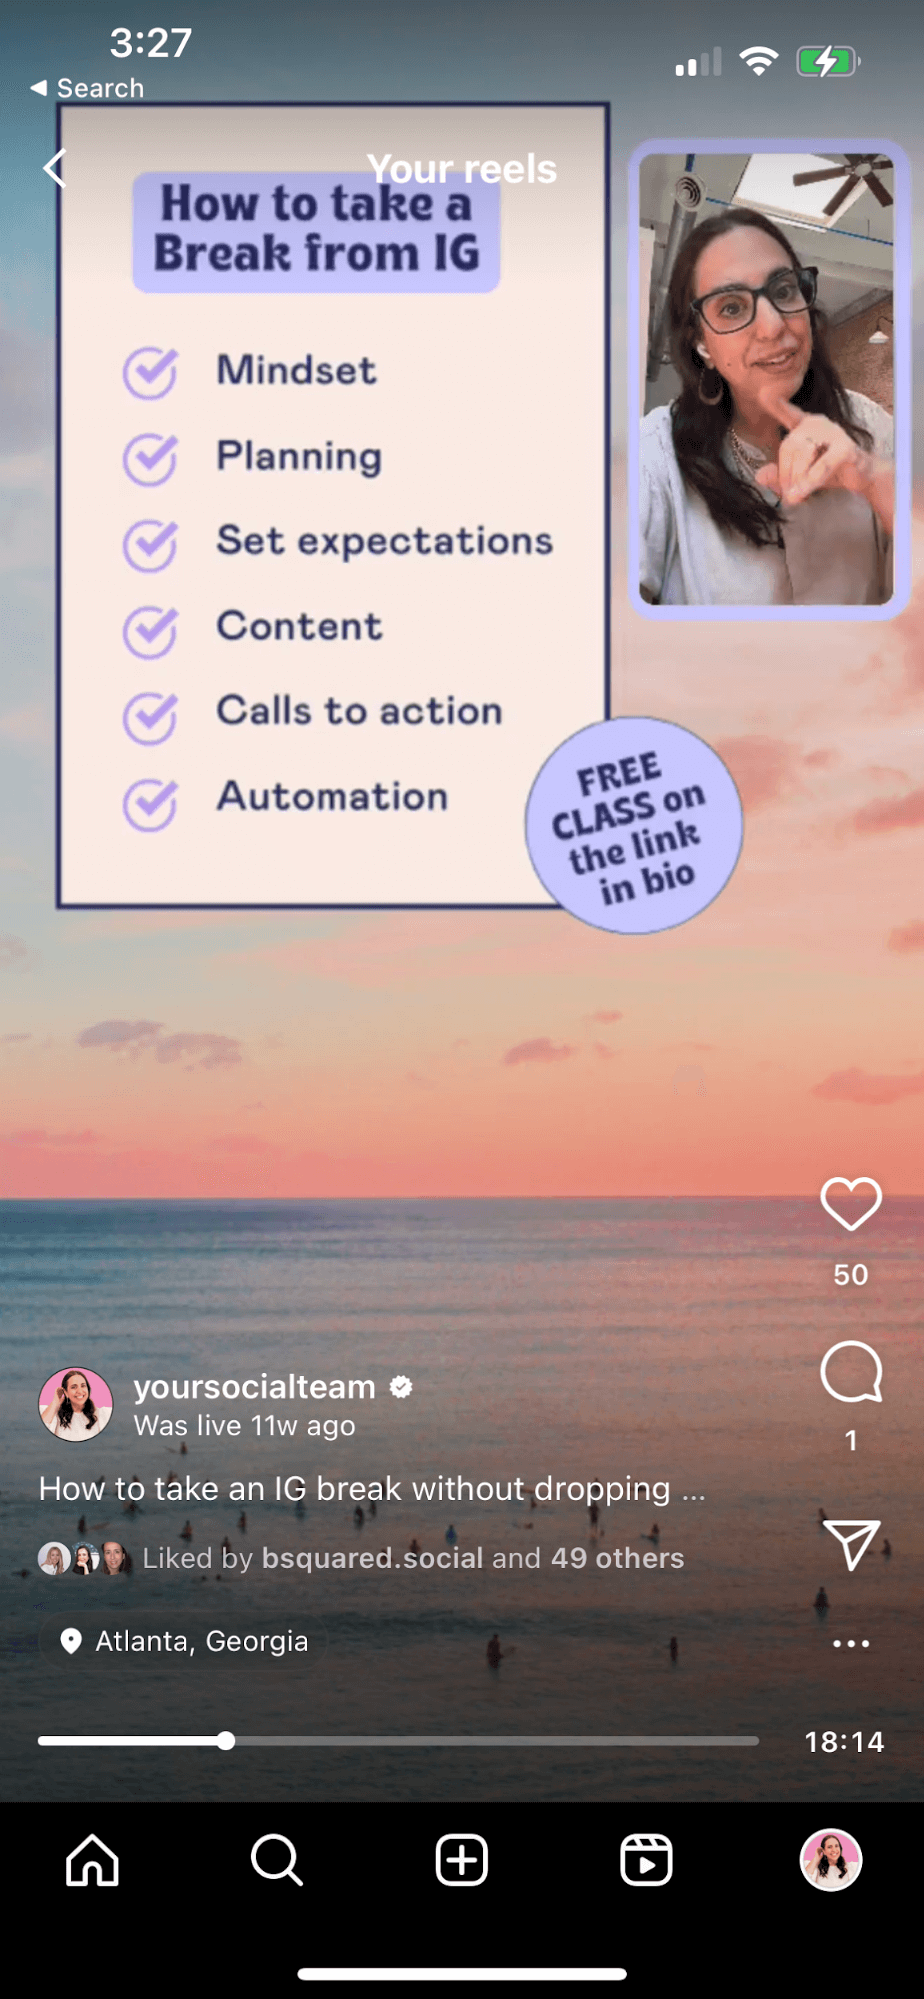 use-native-instagram-features-creatively-share-live-background-summary-of-topic-6